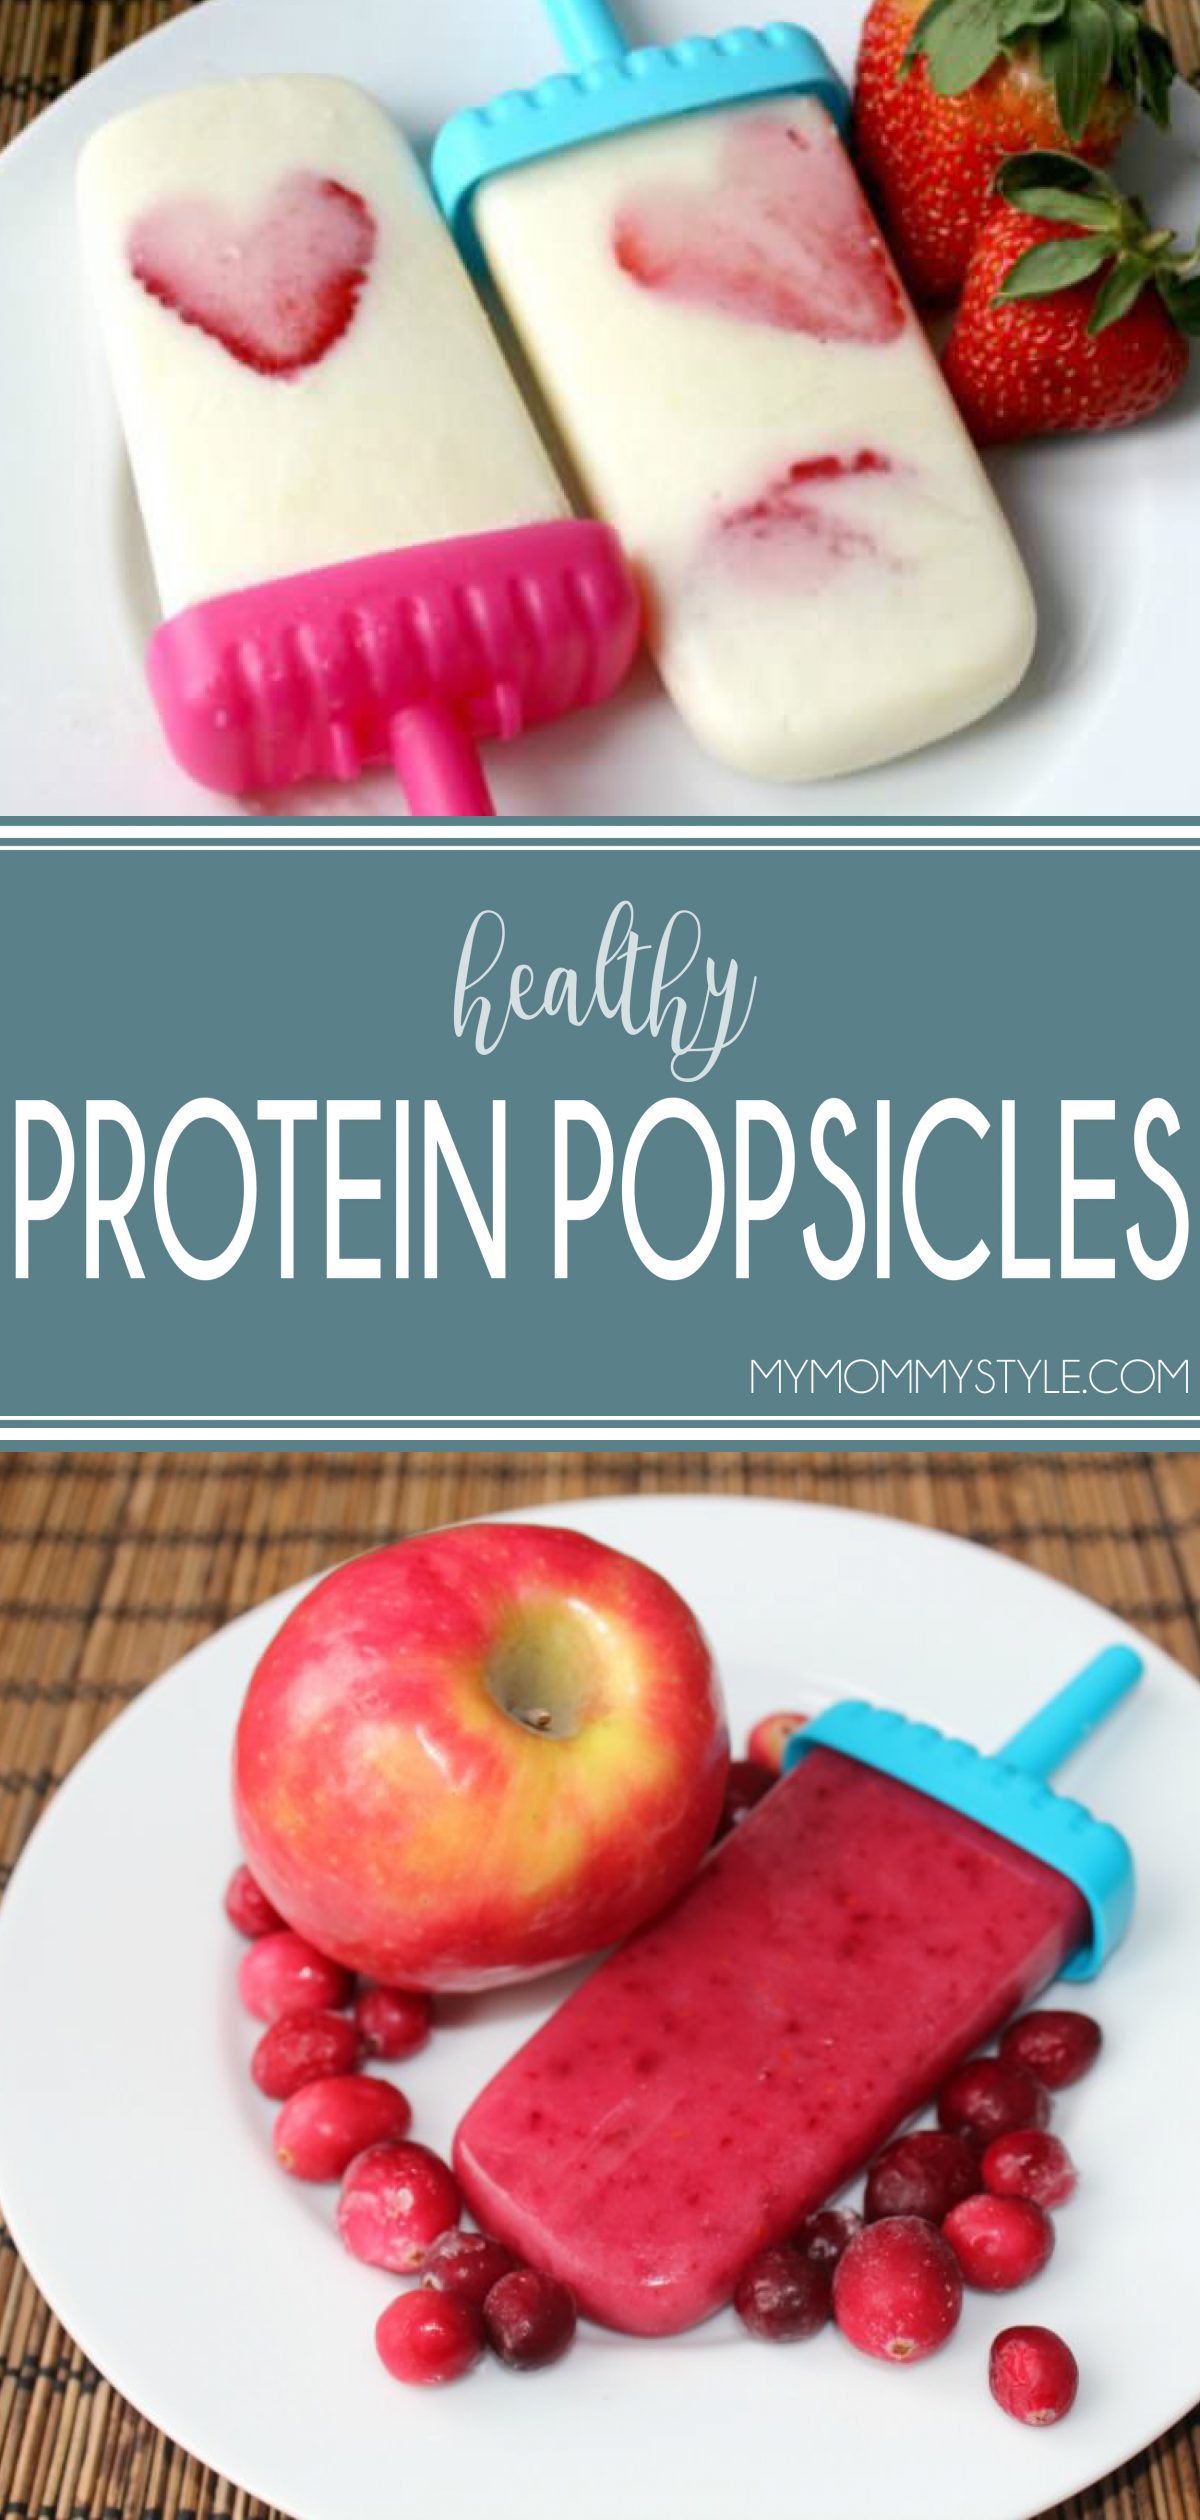 Finding healthy, natural sugars can be tricky and at the end of the day it is nice to have a little treat! Enter Healthy Protein Popsicles! These tasty treats really fit the bill and are so delicious! via @mymommystyle